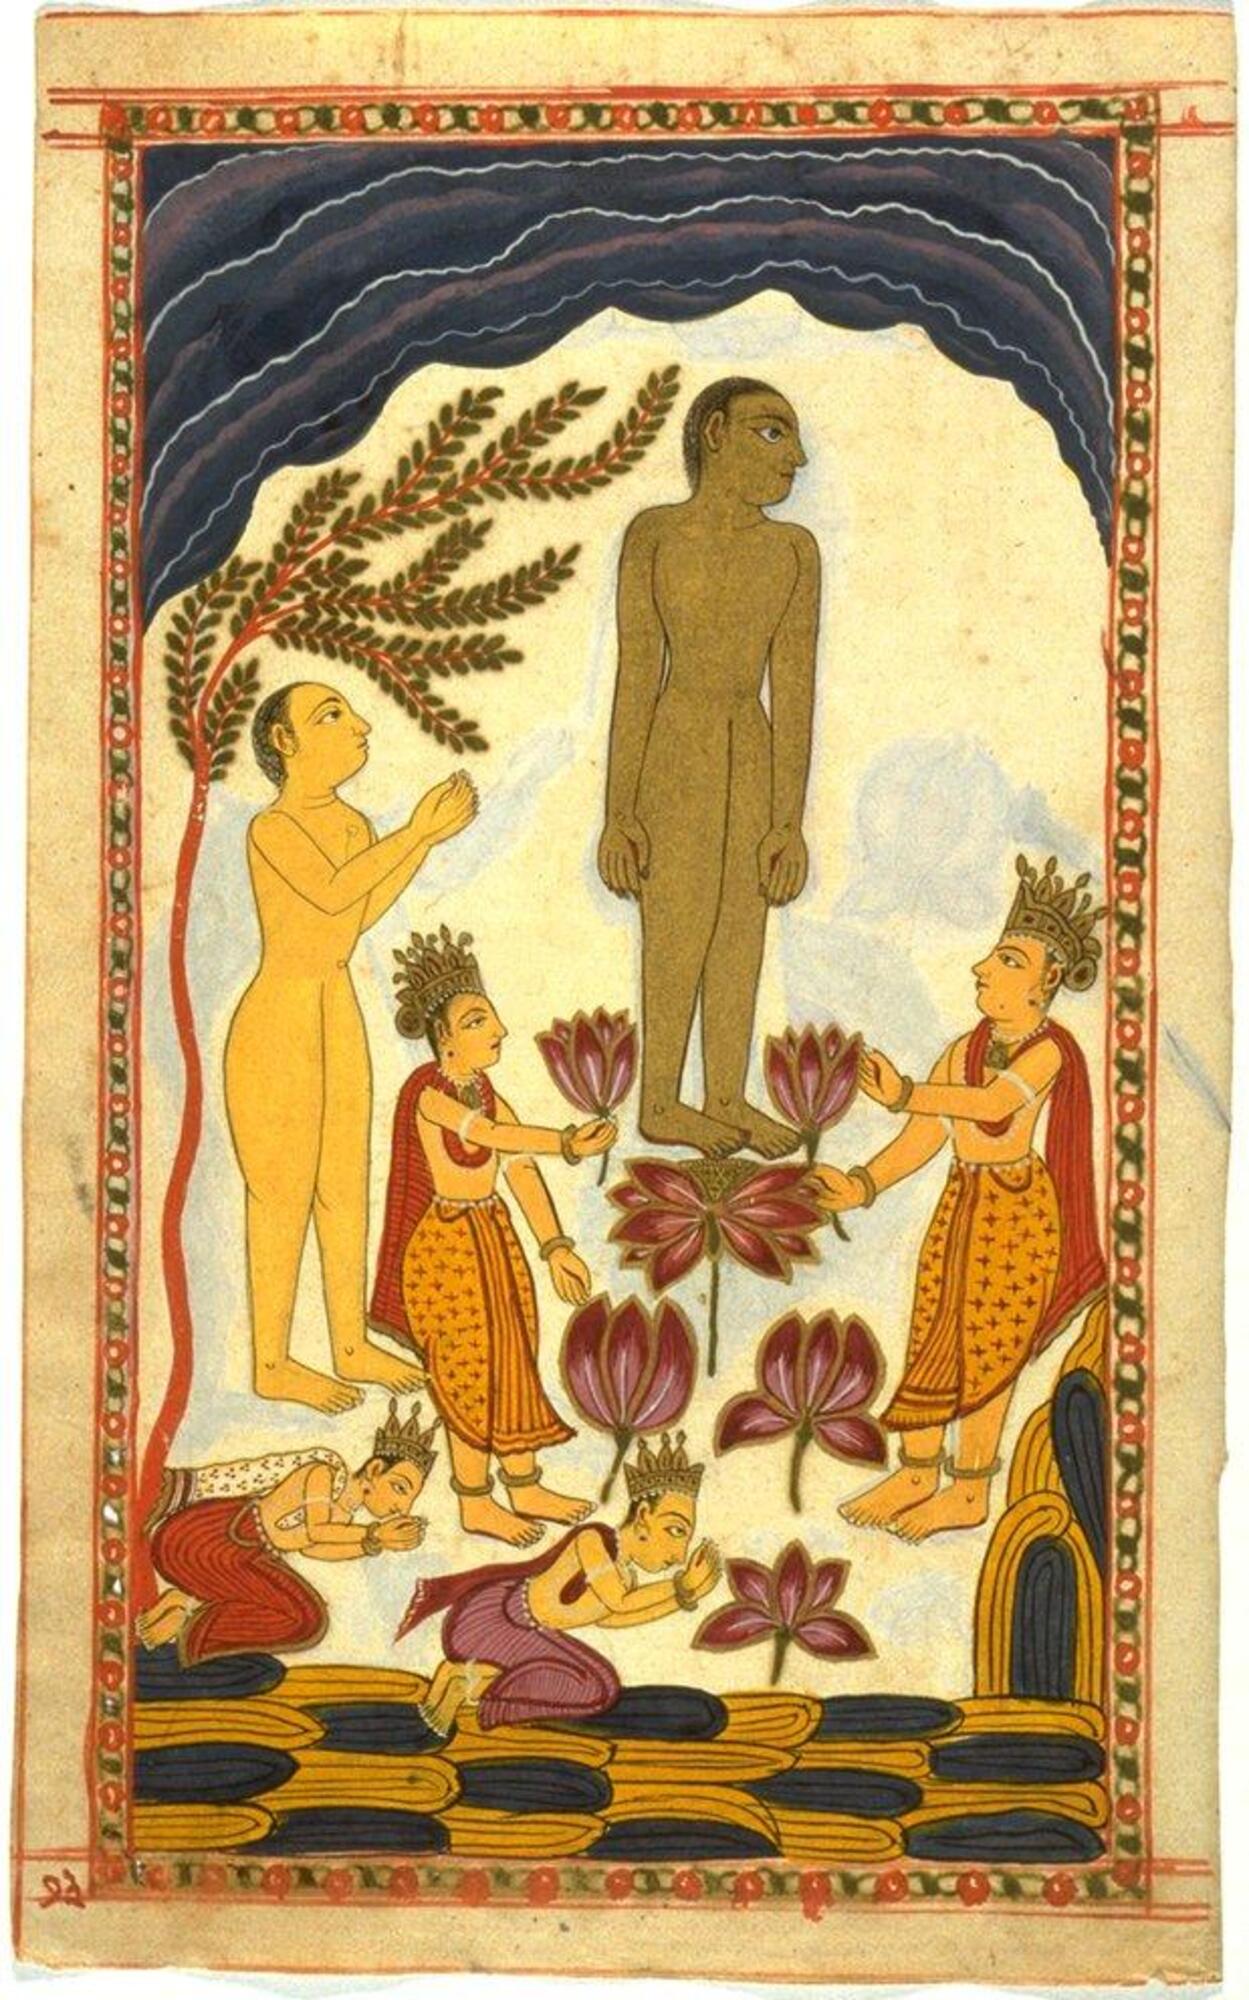 Nude (Jina, center) and a devotees (nude on left, and other clothed figures) depicted in a folio of a Jain manuscript.<br />
The image contains trees, lotus flowers and dark clouds. The the colors are composed of vivid reds, browns, yellows, greens and blues. The image is surrounded by a red and green pattereed border which resembles a chain.